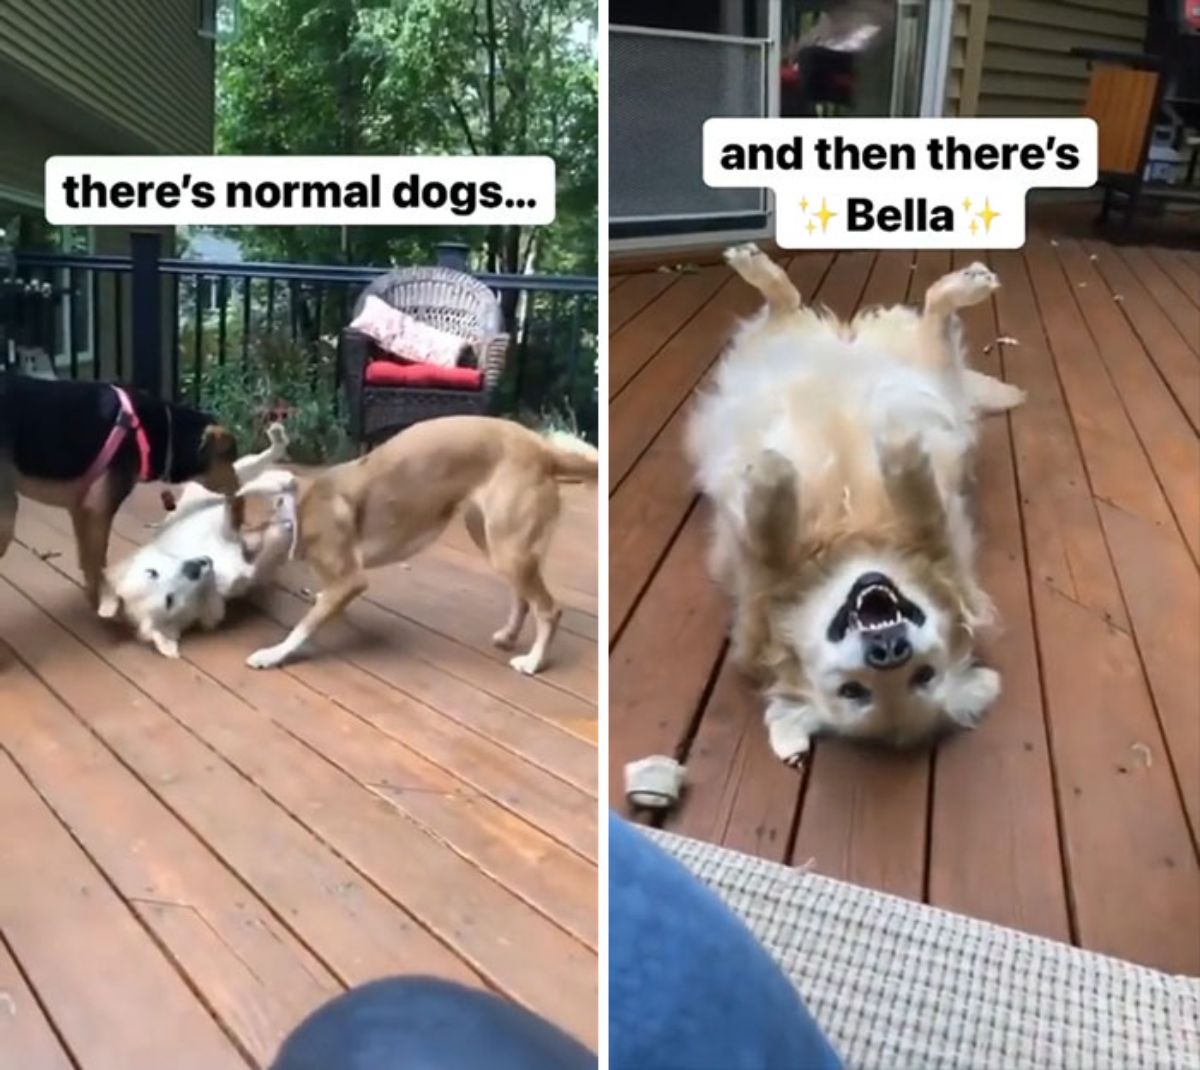 in the first photo a brown and white dog is belly up with a brwon dog and black and brown dog and in the second photo the brown and white dog is laying belly up